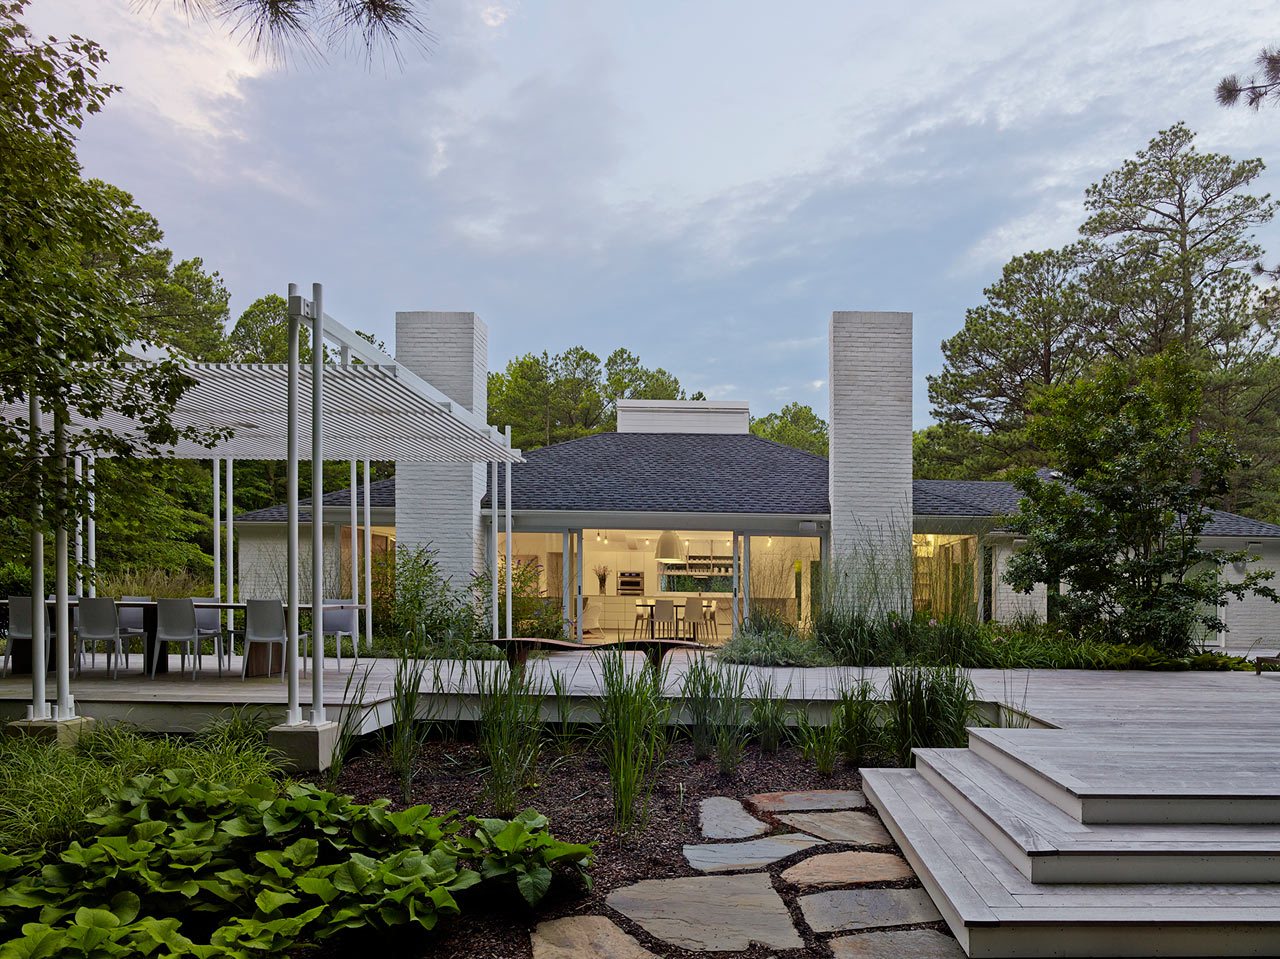 A Private Residence in Maryland Gets a Major Renovation